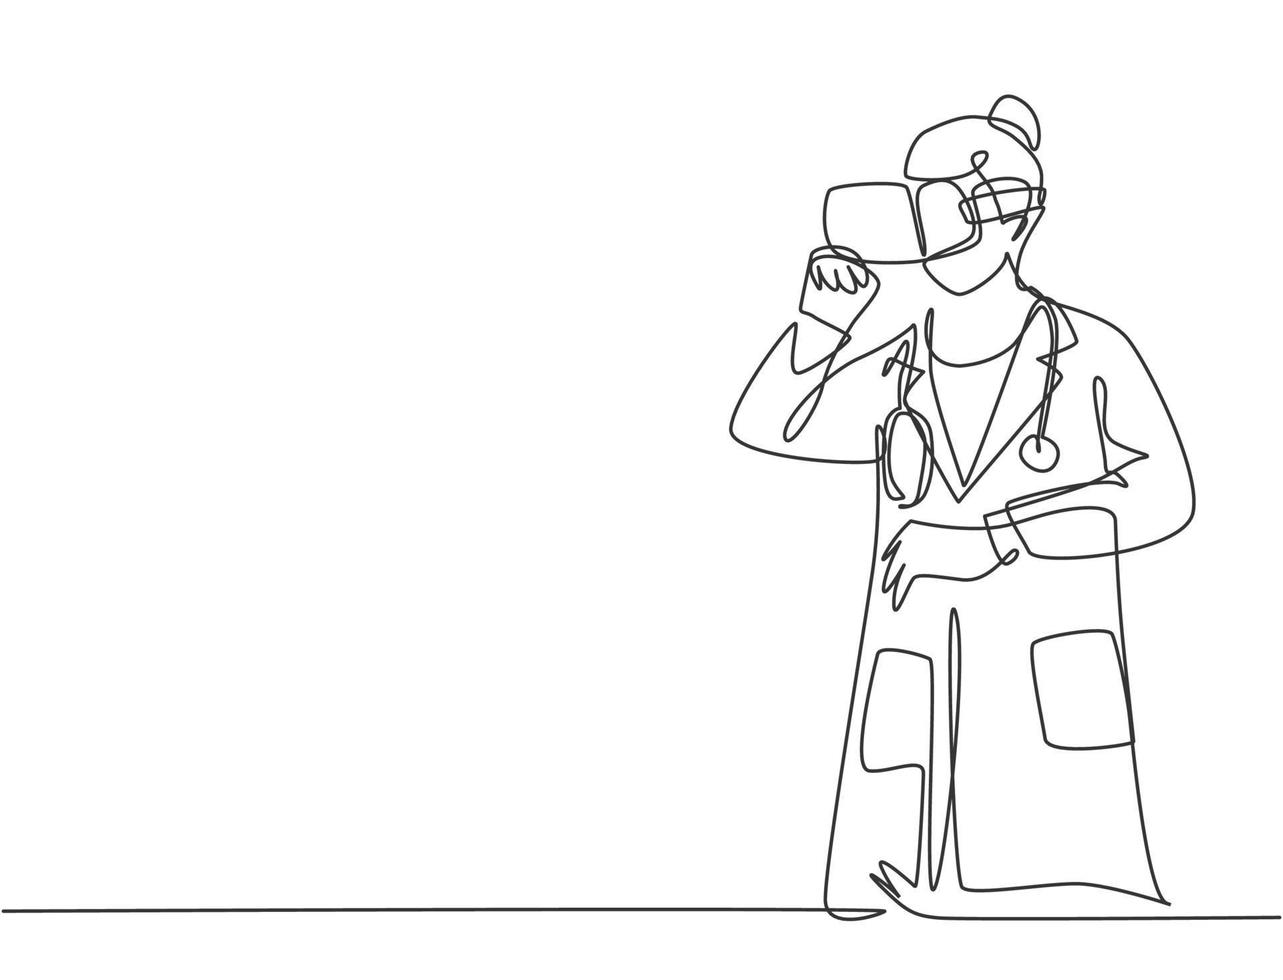 One single line drawing of young serious female doctor thinking pensively watching visual from virtual reality. Smart technology futuristic game concept continuous line draw design vector illustration